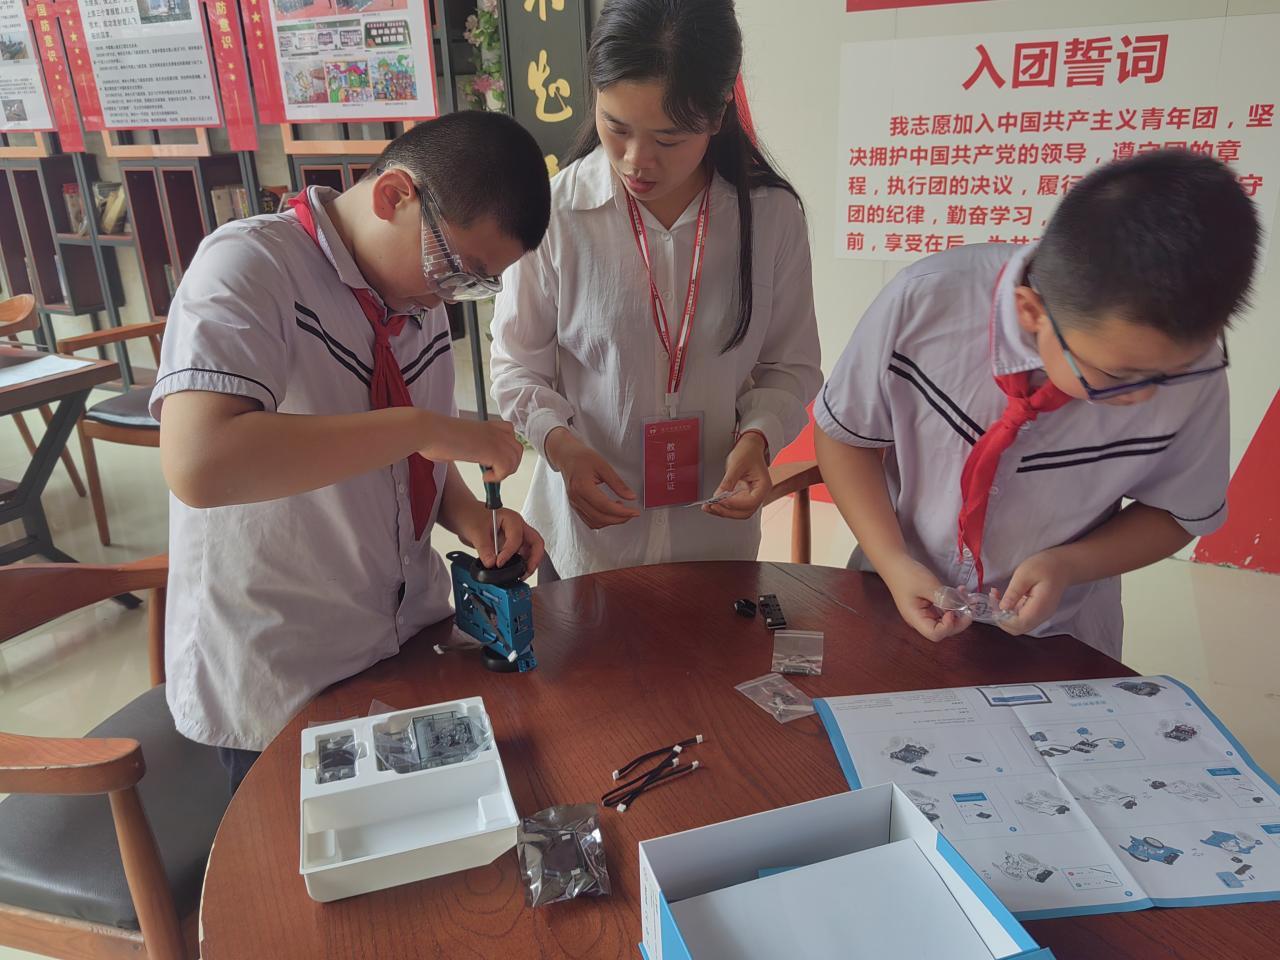 Chinese STEM students work with teacher